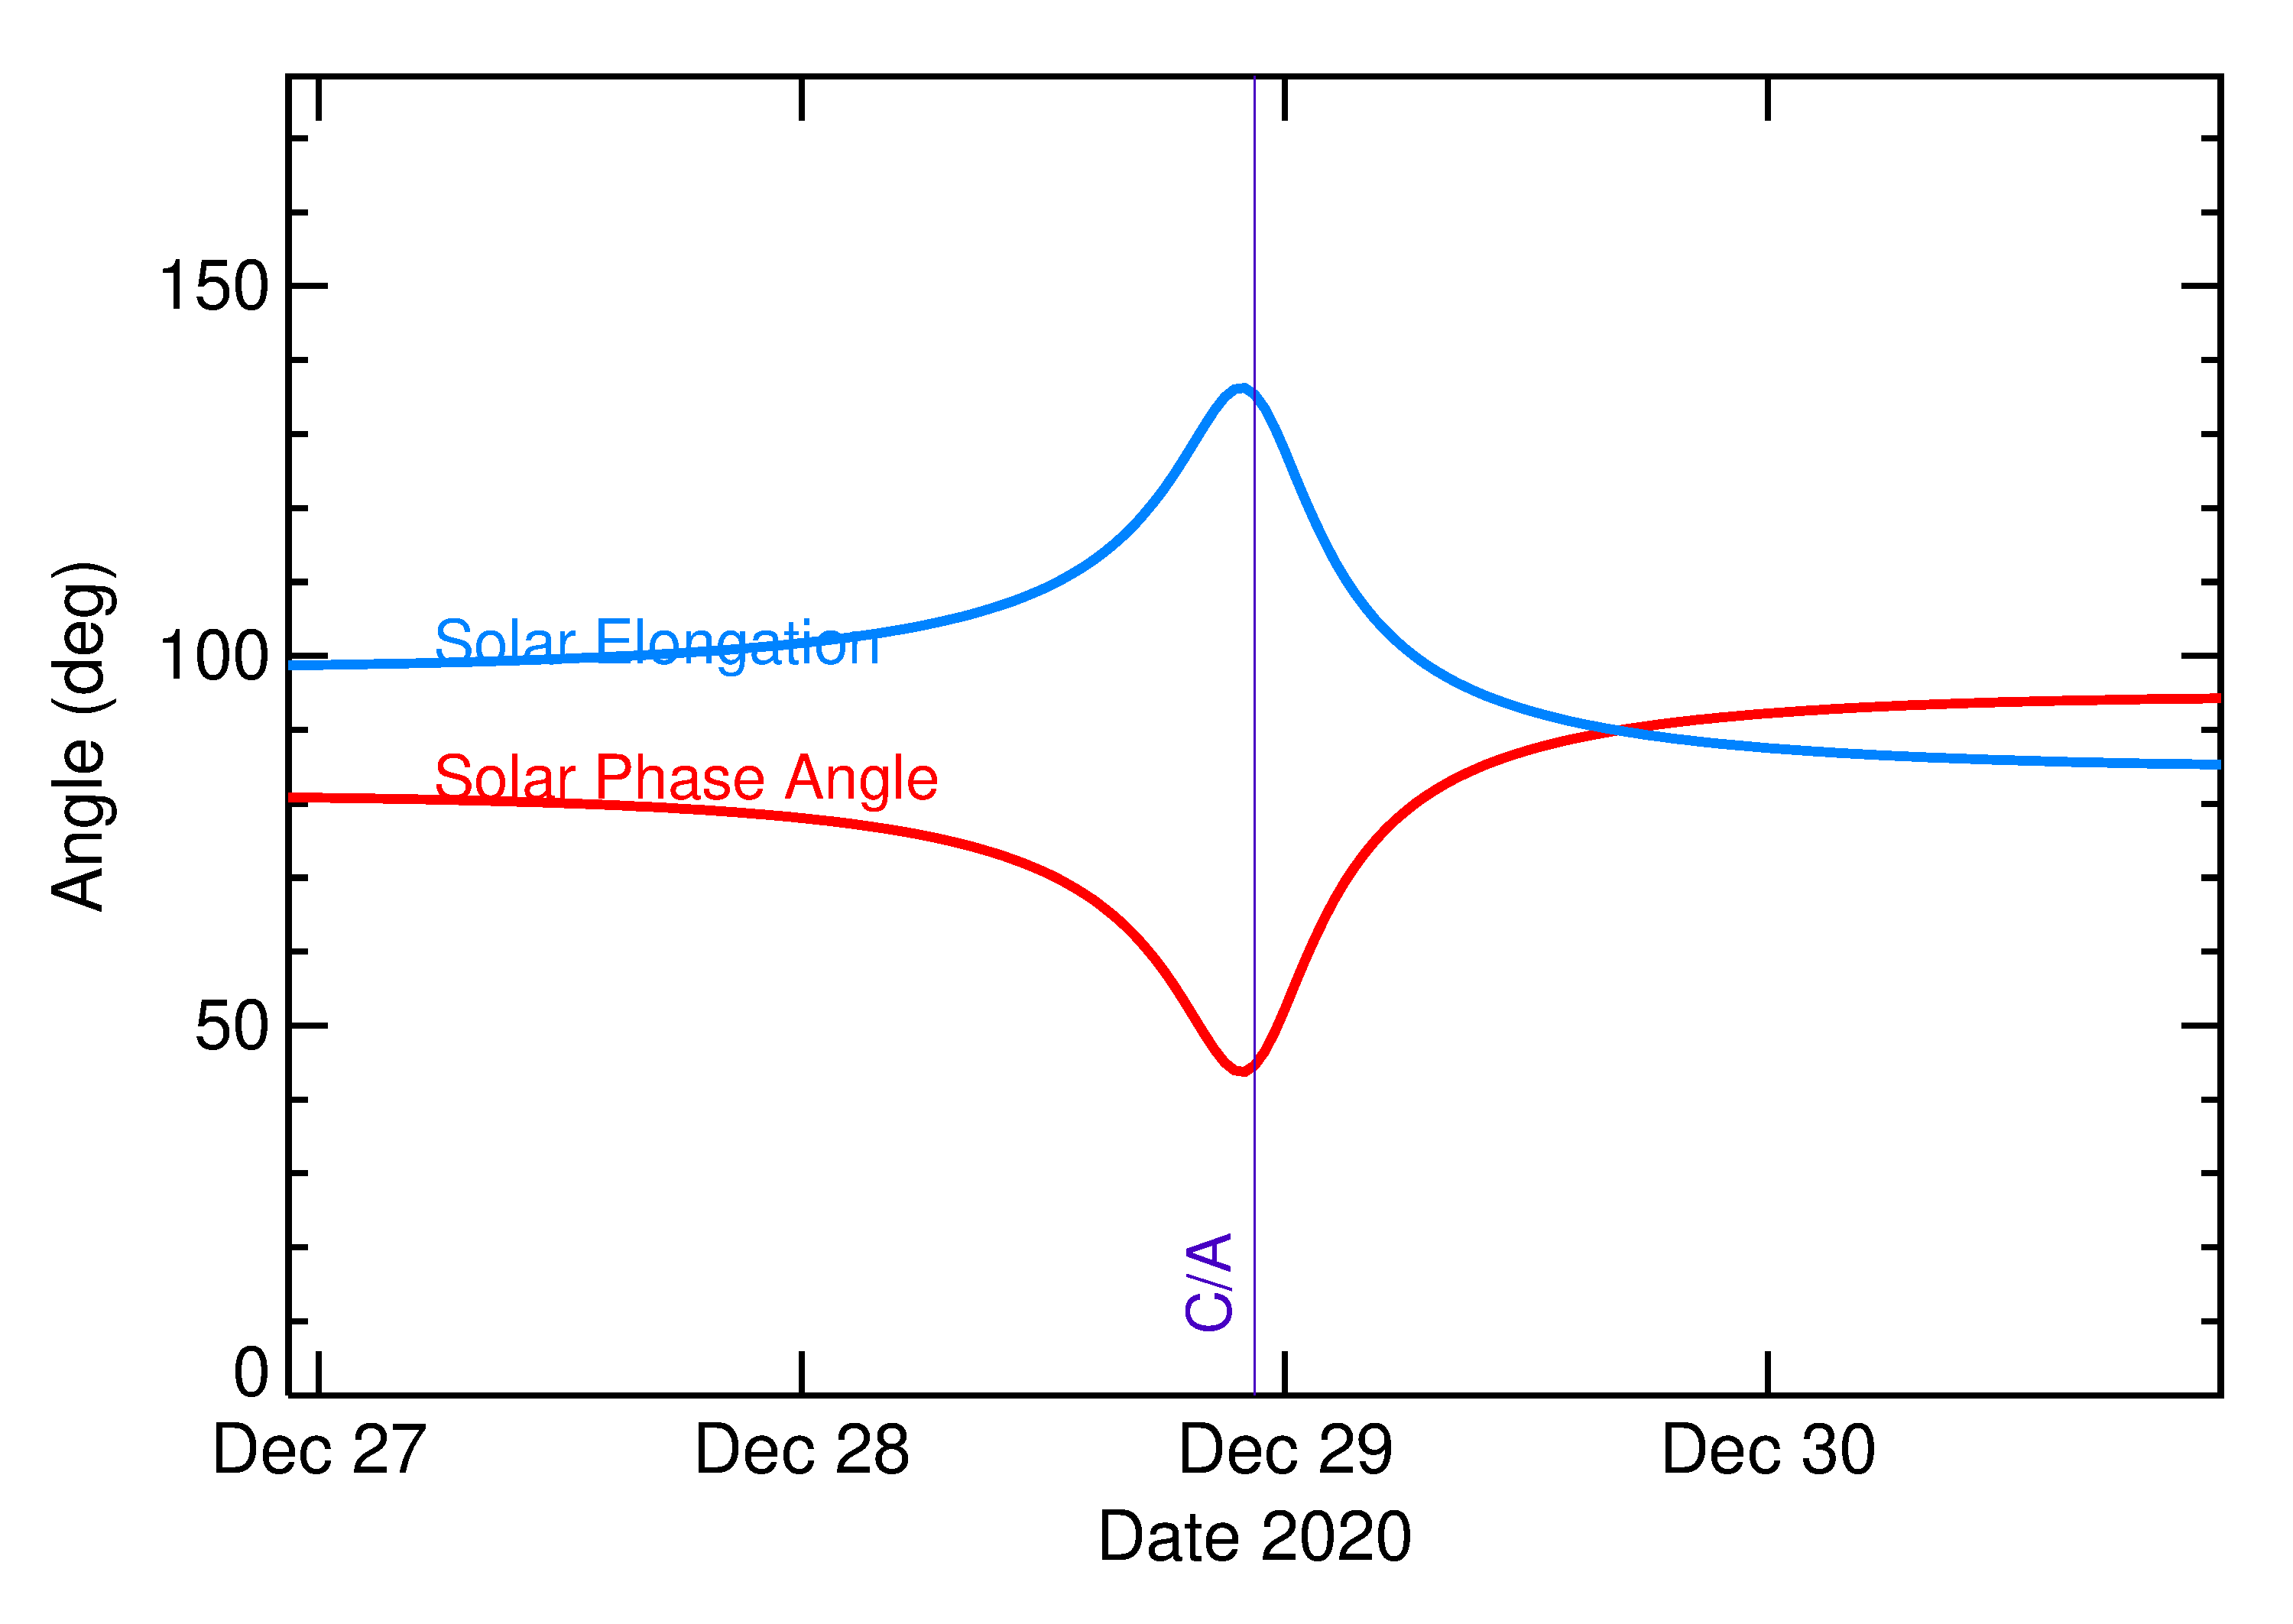 Solar Elongation and Solar Phase Angle of 2020 YS4 in the days around closest approach